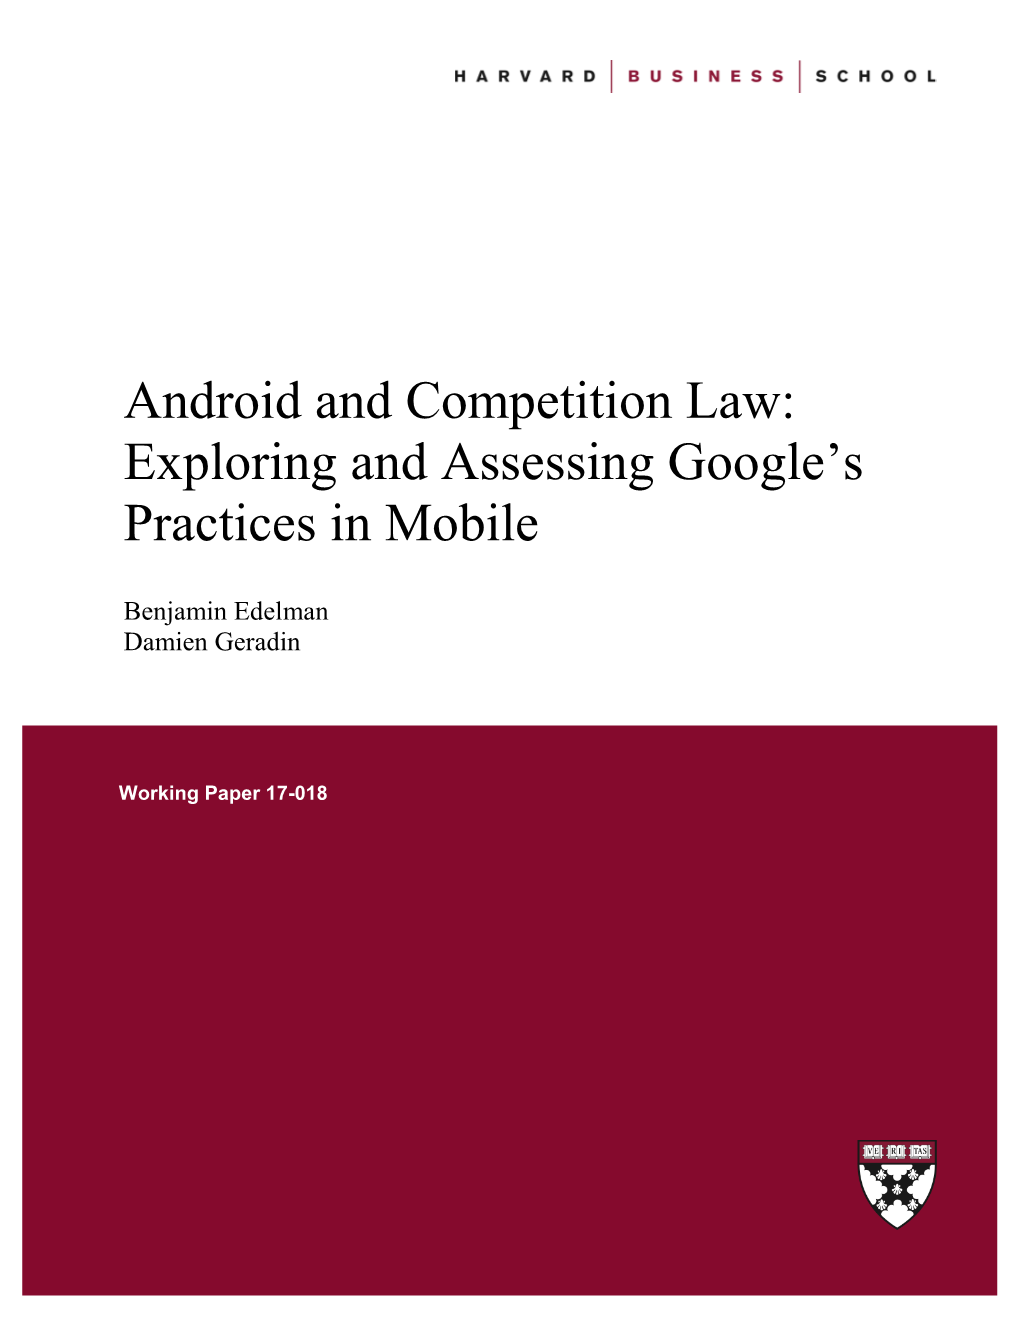 Android and Competition Law: Exploring and Assessing Google’S Practices in Mobile